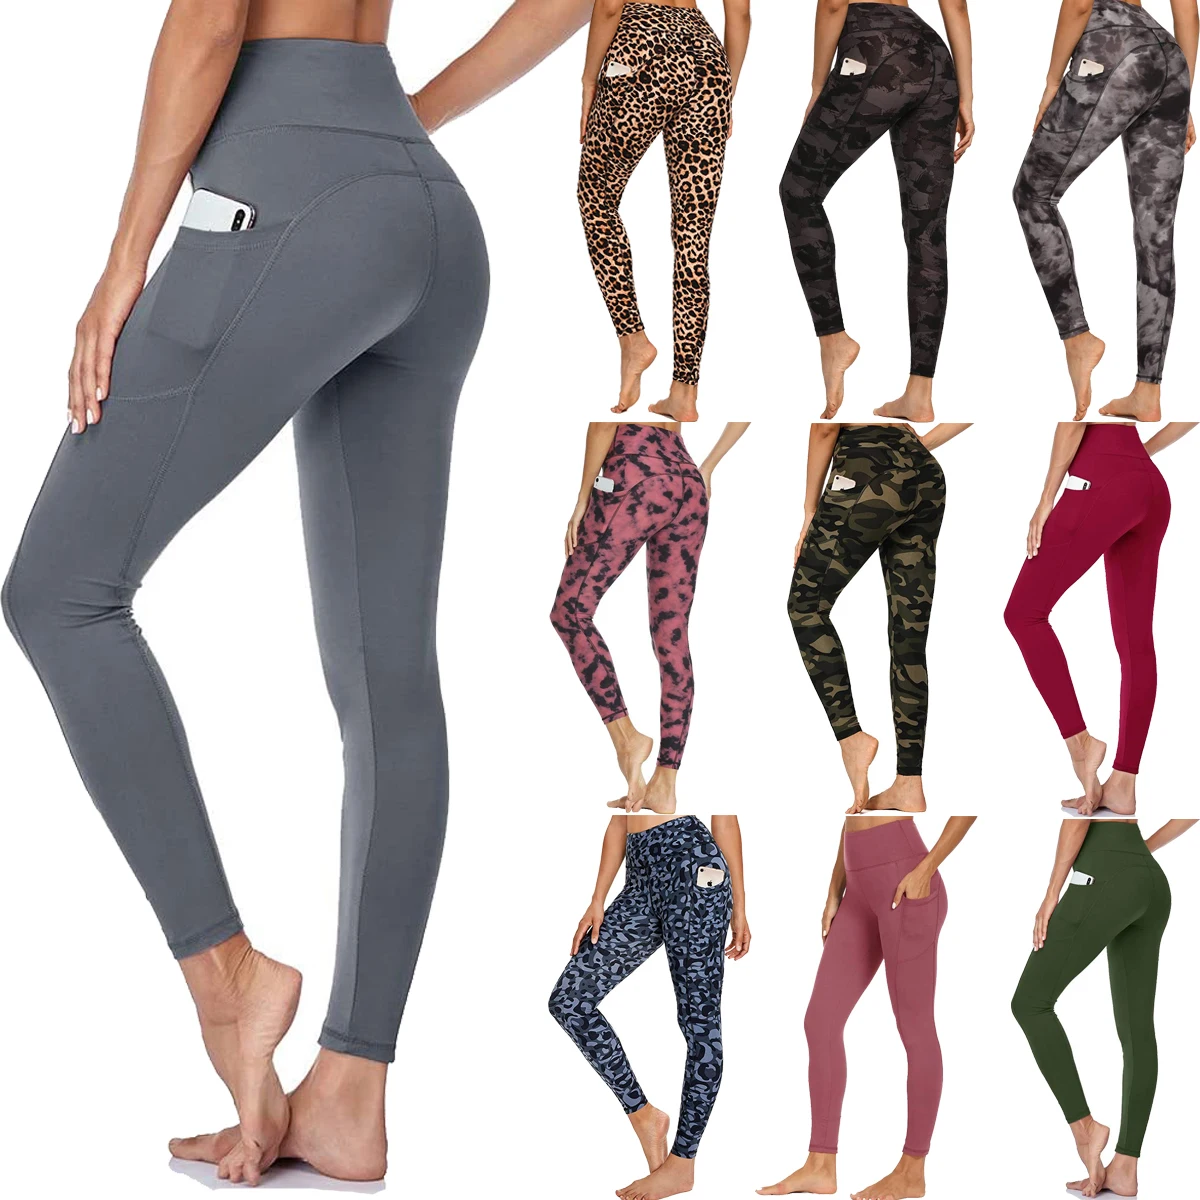 Wholesale Workout Gym Fitness Custom Women Printed High Waist Non See Through Yoga Pants Leggings With Pockets